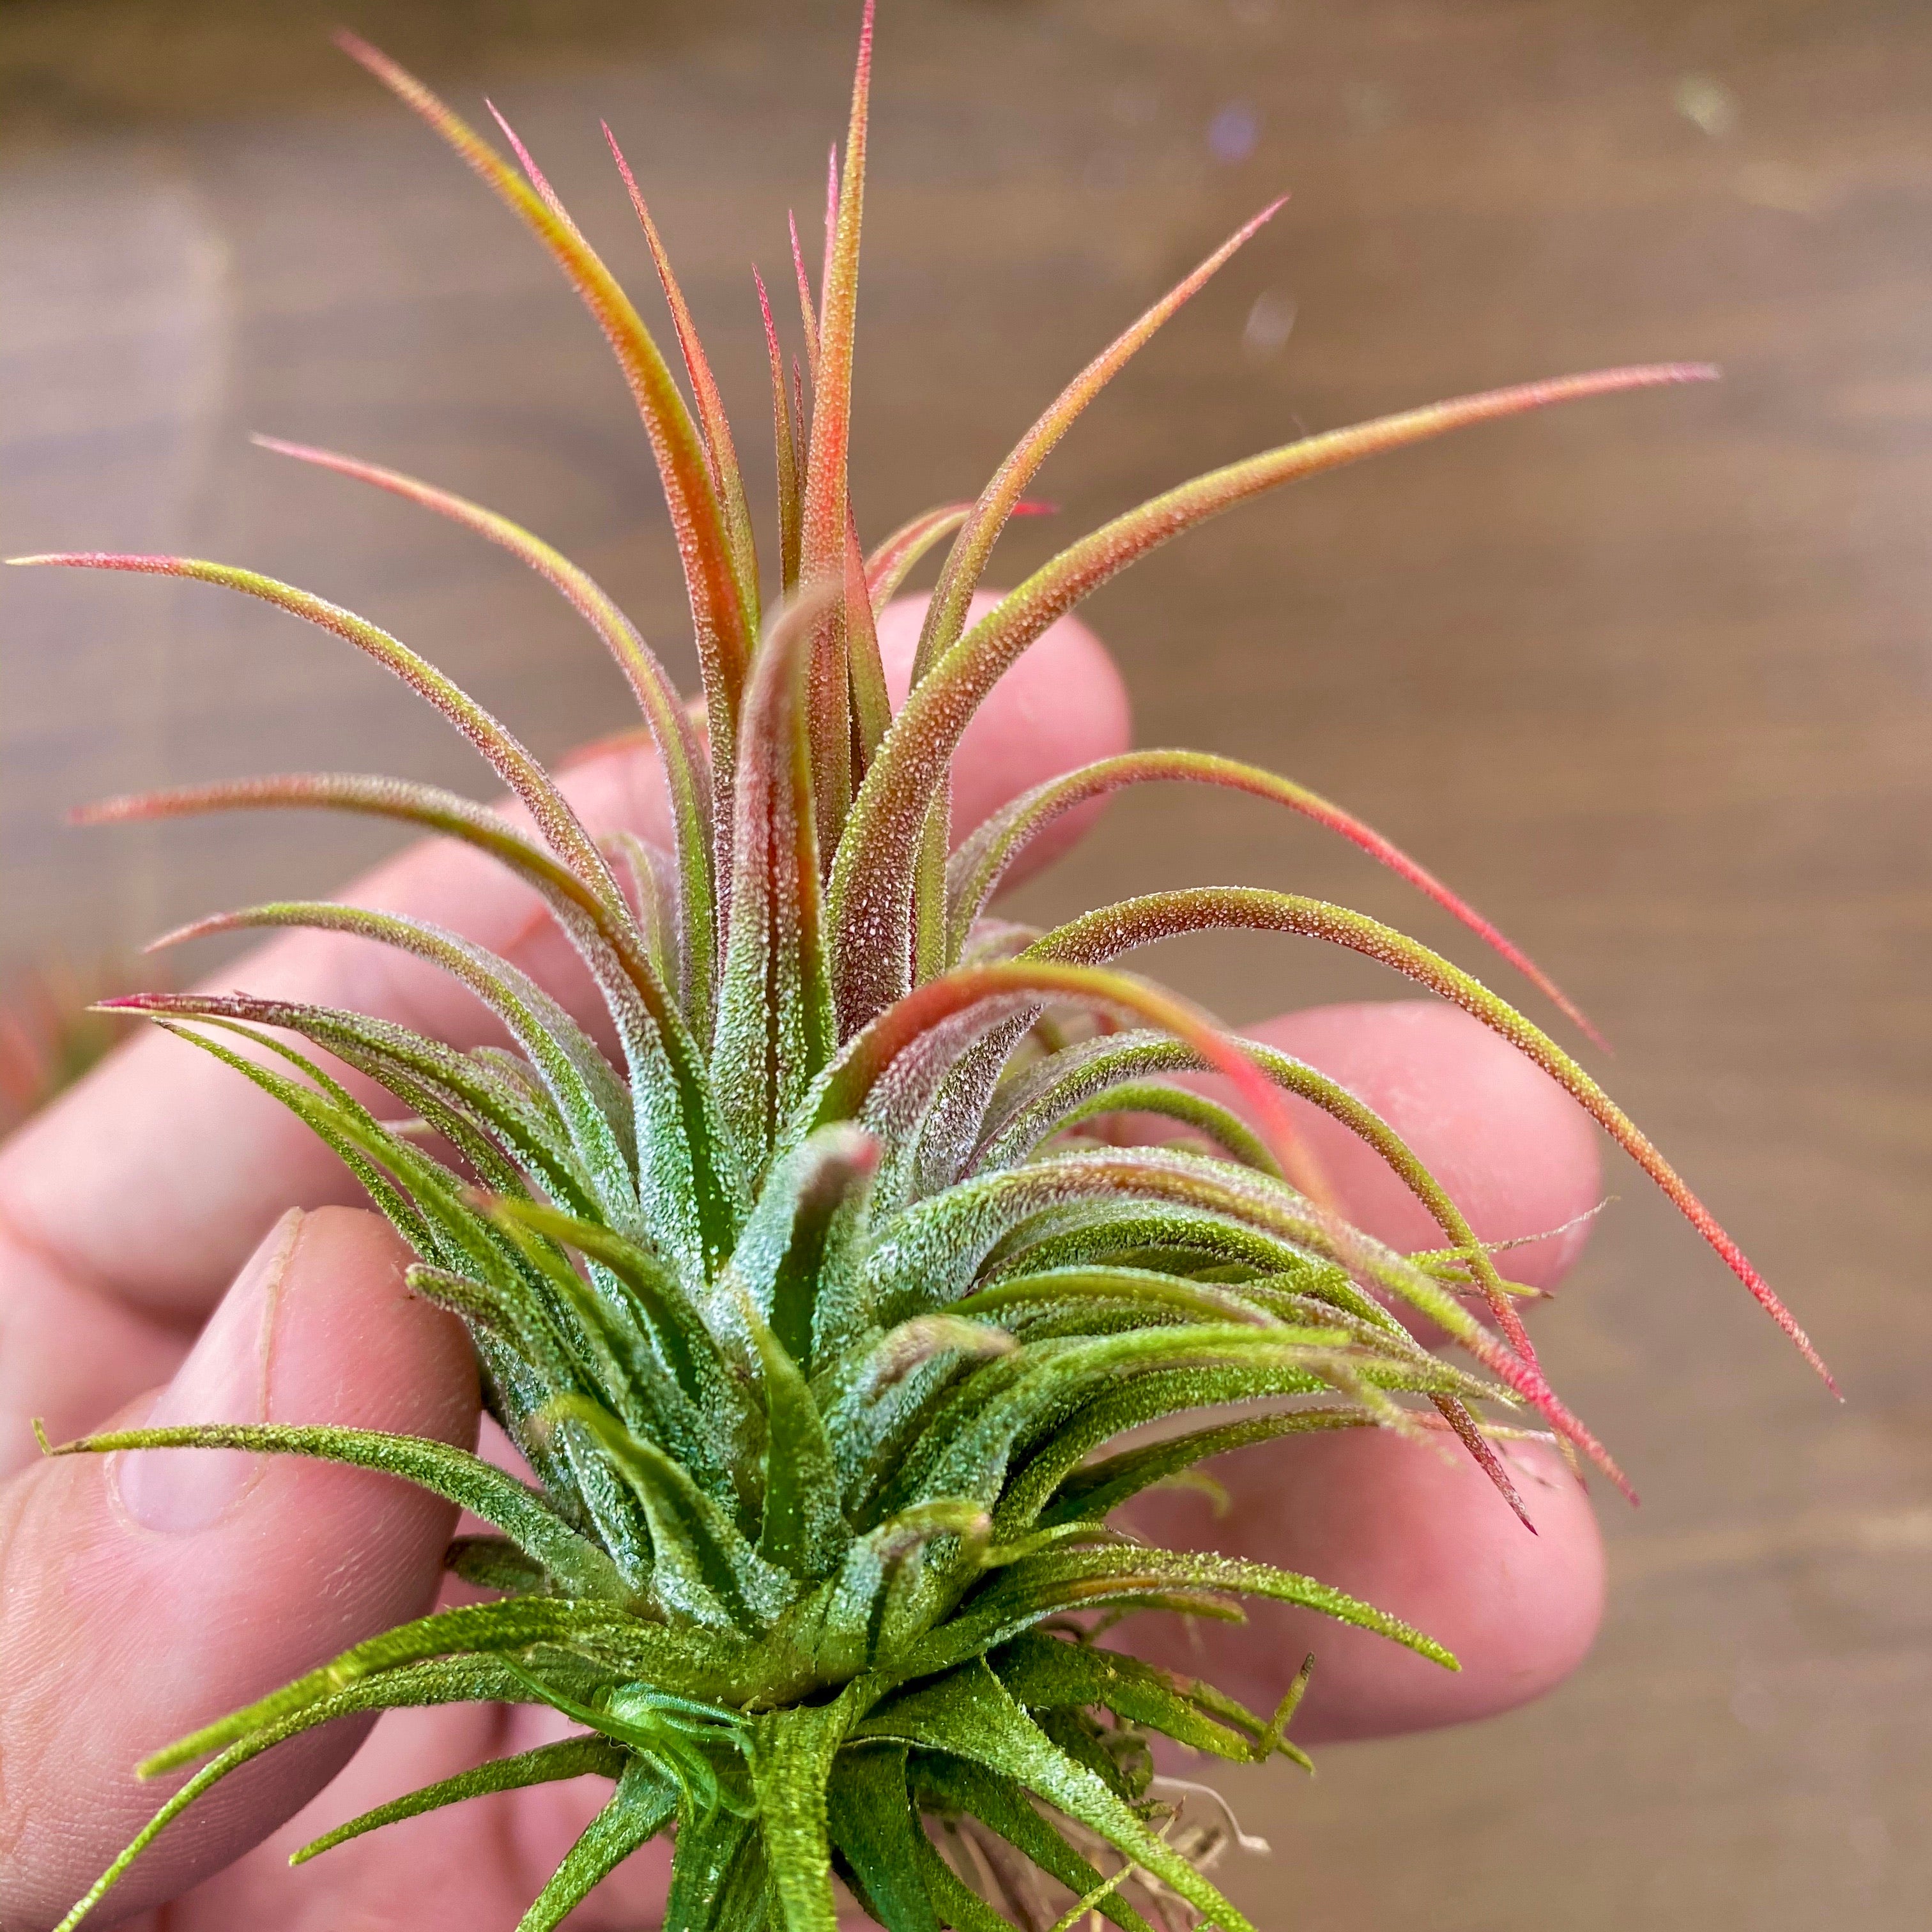 Unique ionantha variety pack <br> you will receive the set pictured